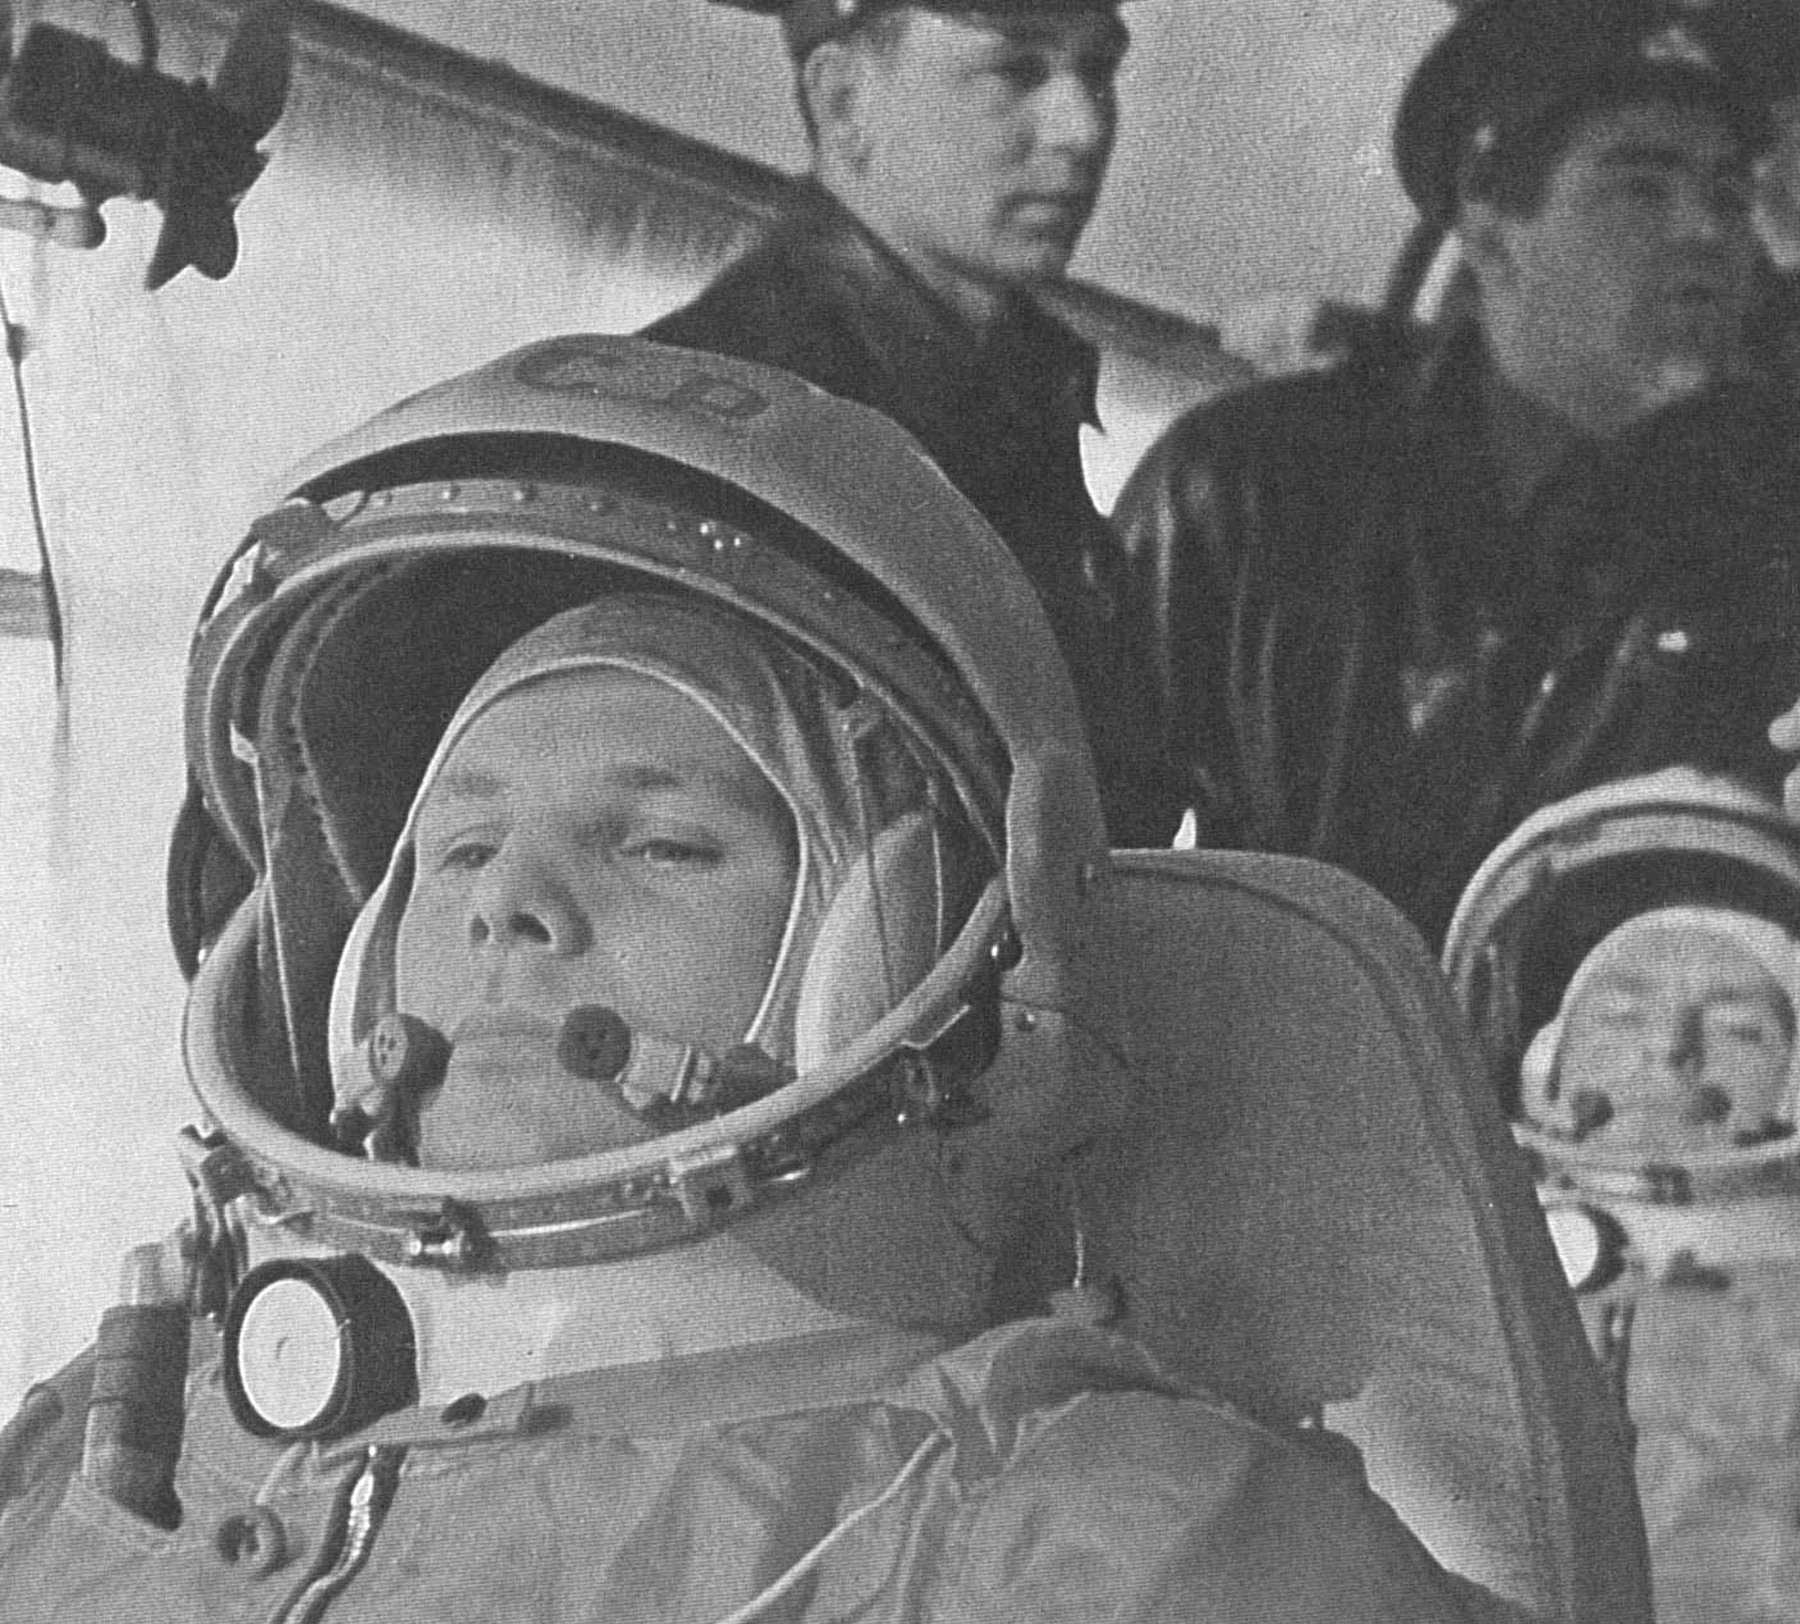 Russian pilot Yuri Gagarin became the first person to fly into space on April 12, 1961.